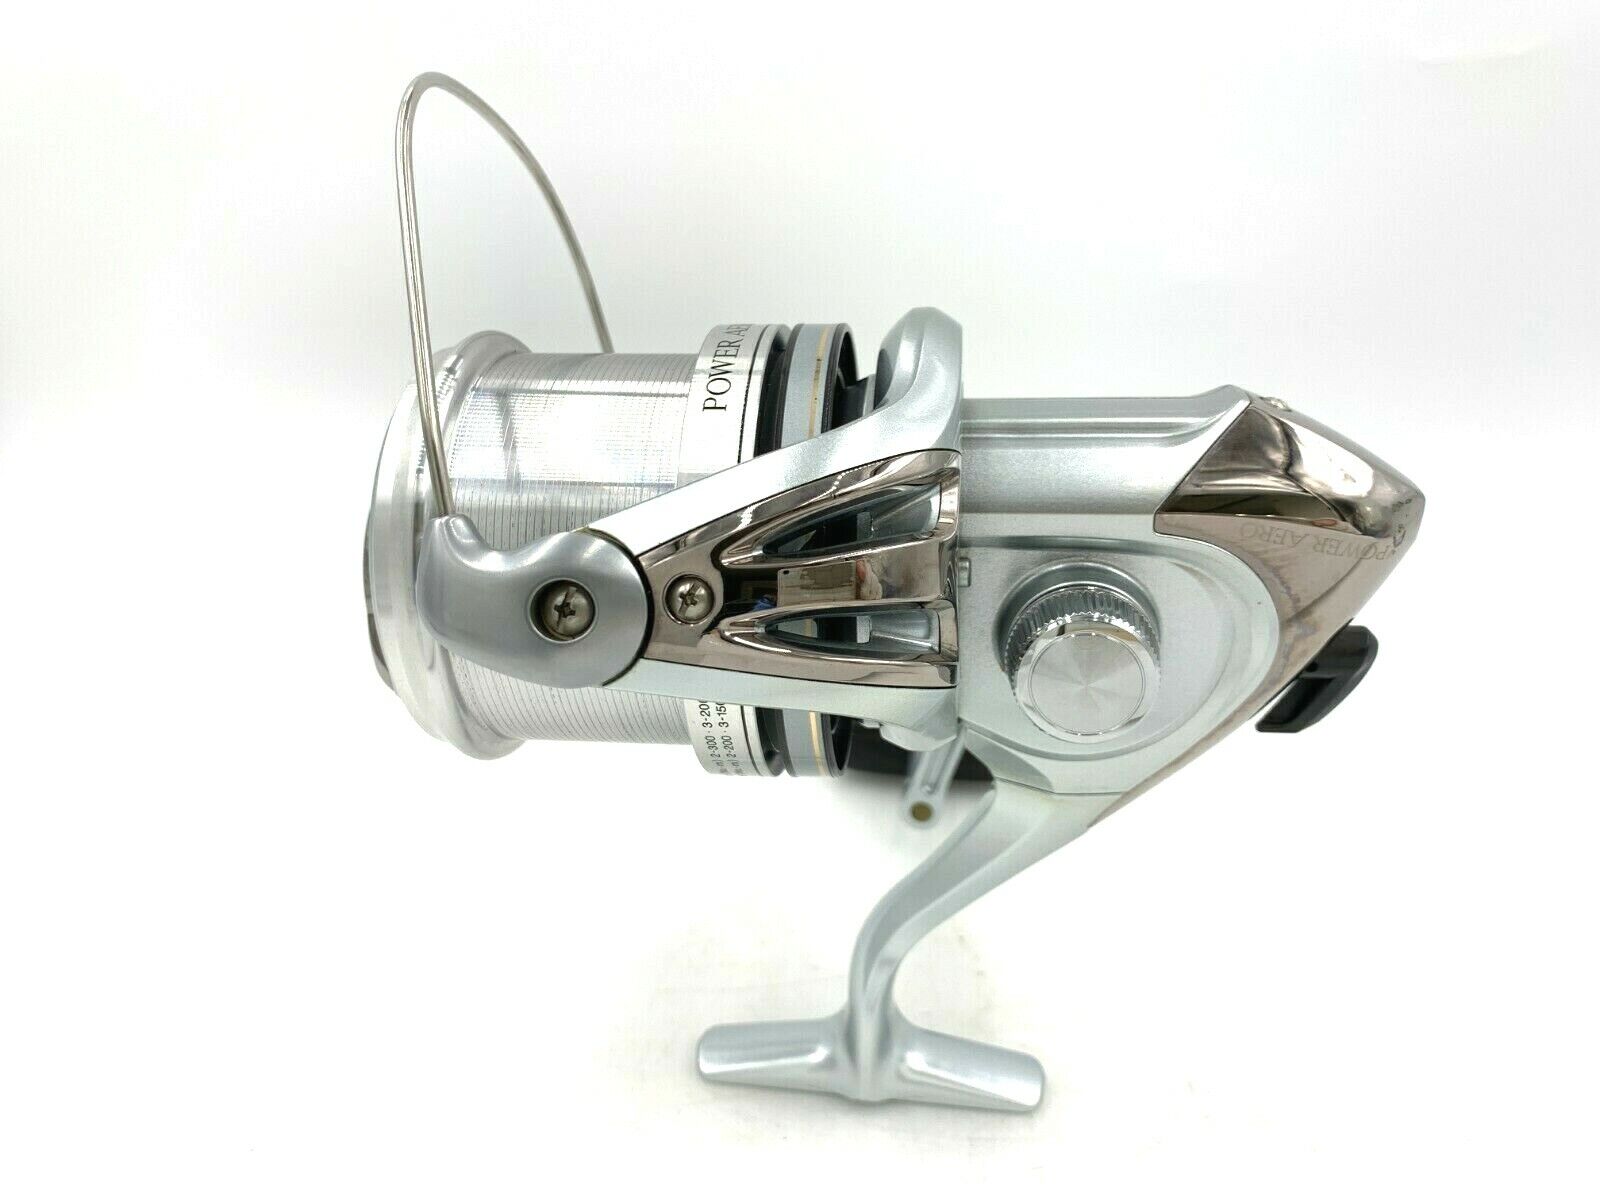 Shimano POWER AERO Spinning Reel 3 units set Surf Casting Fishing EXCELLENT  2517